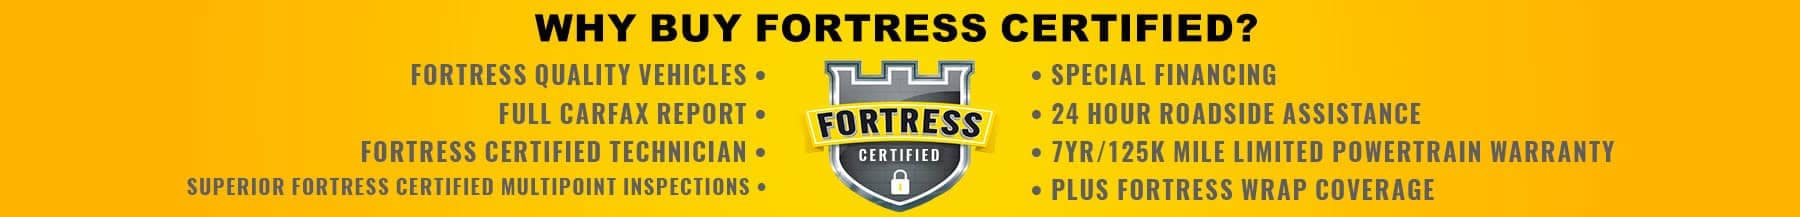 fortress certified banner